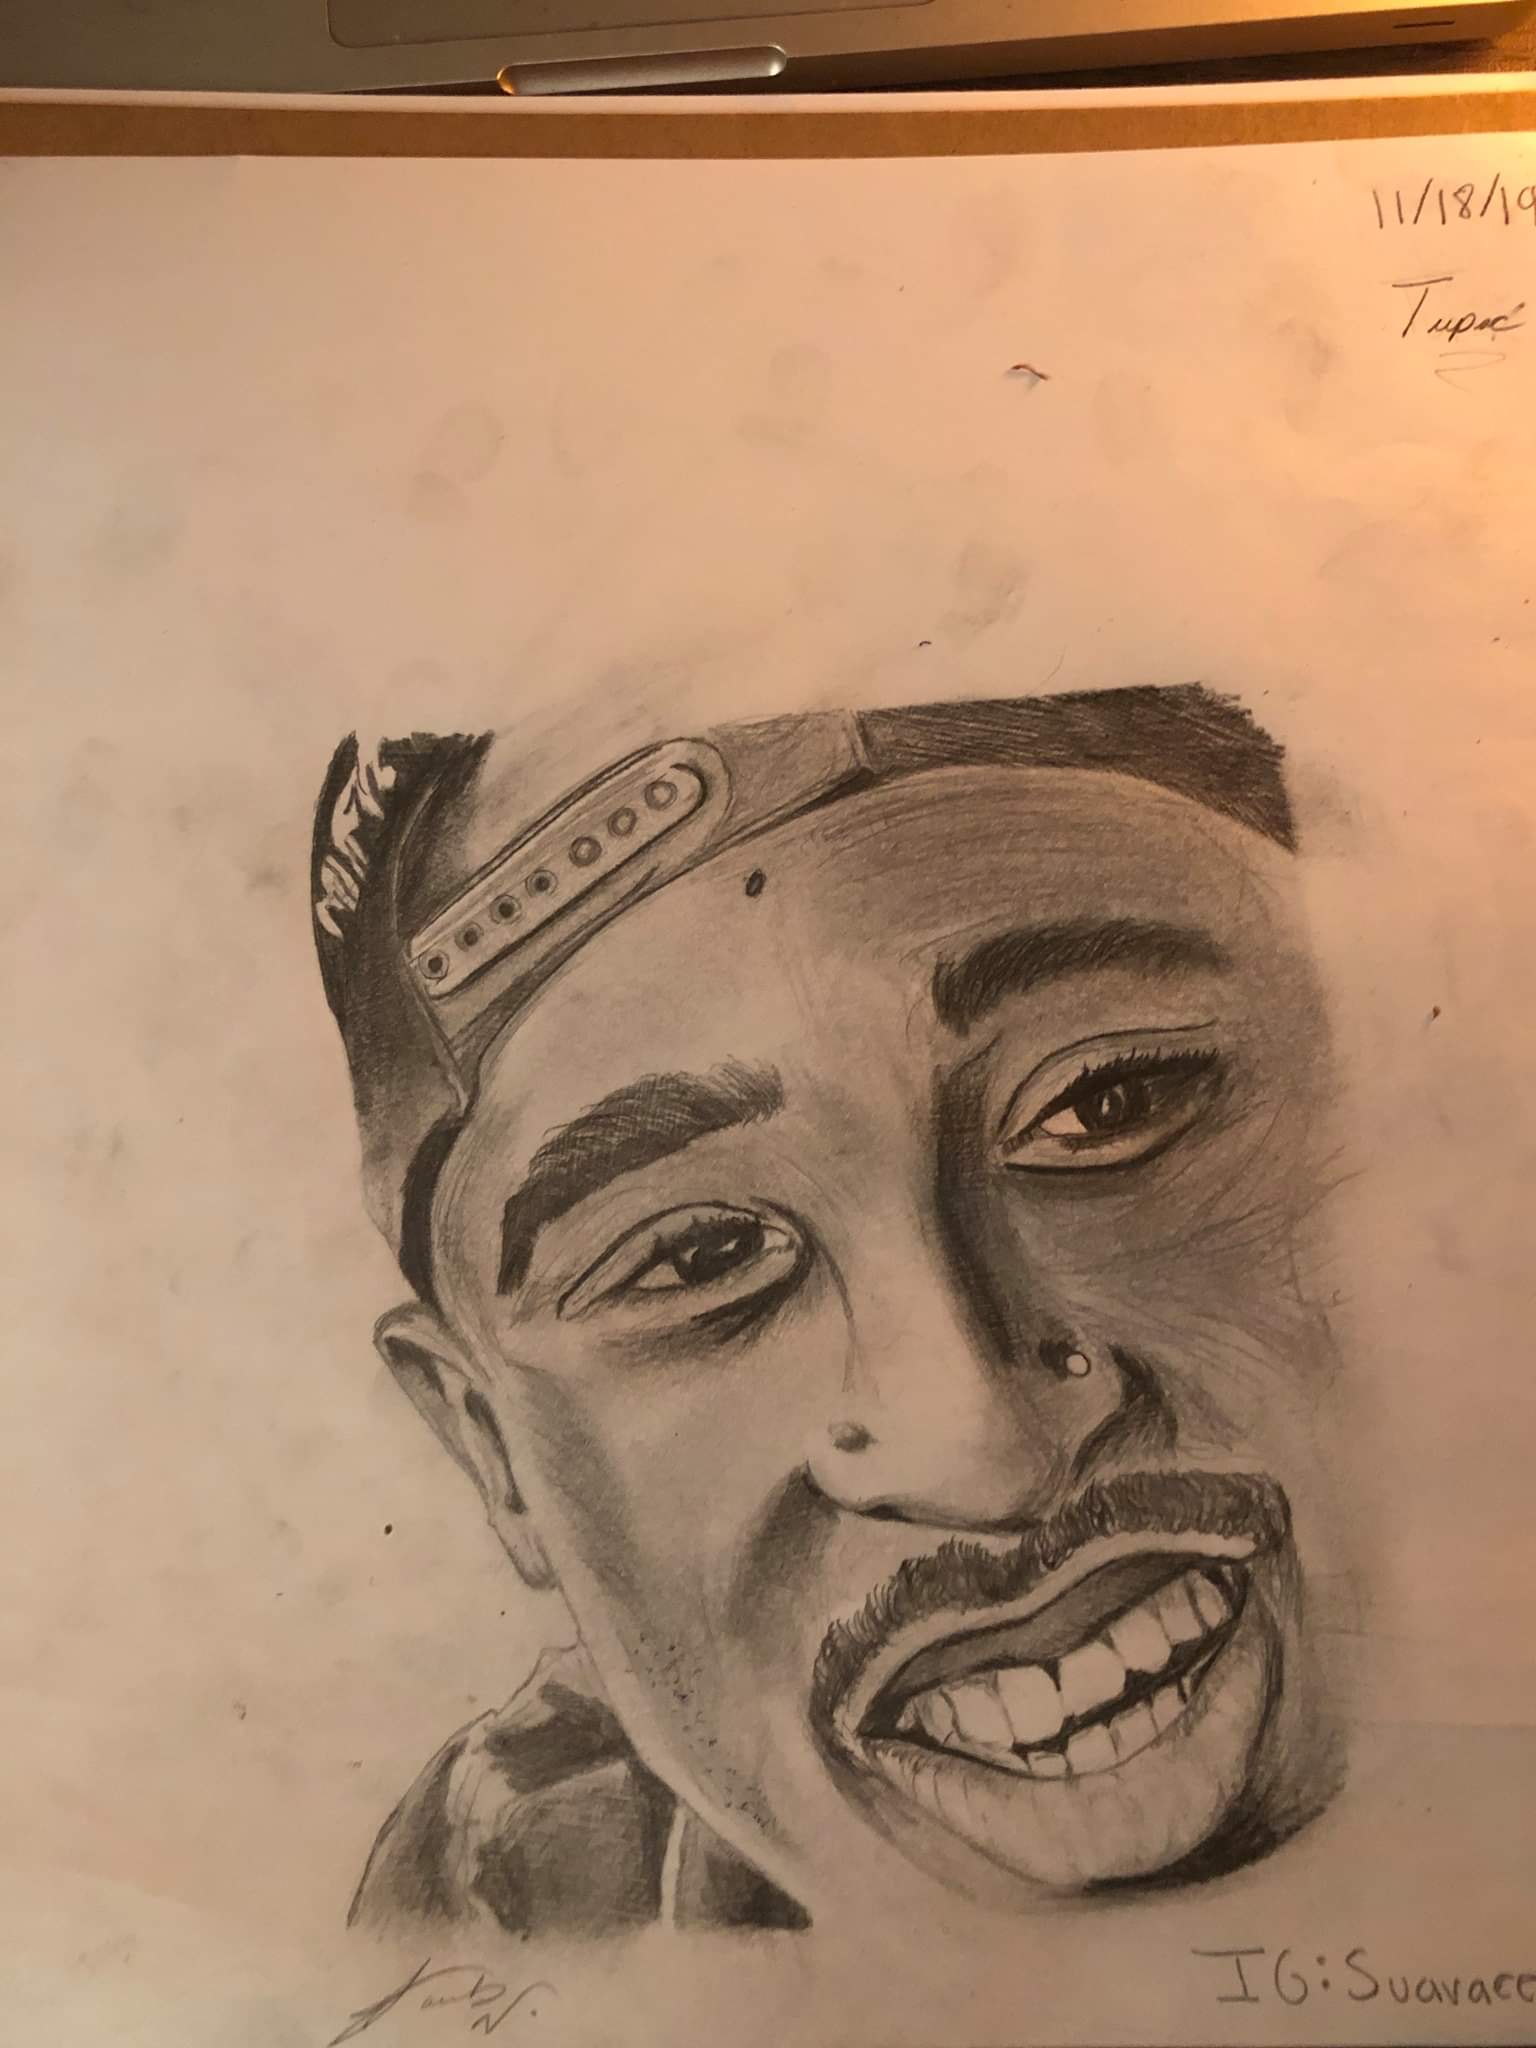 Have you been looking for a tupac drawing, Well today is your lucky day